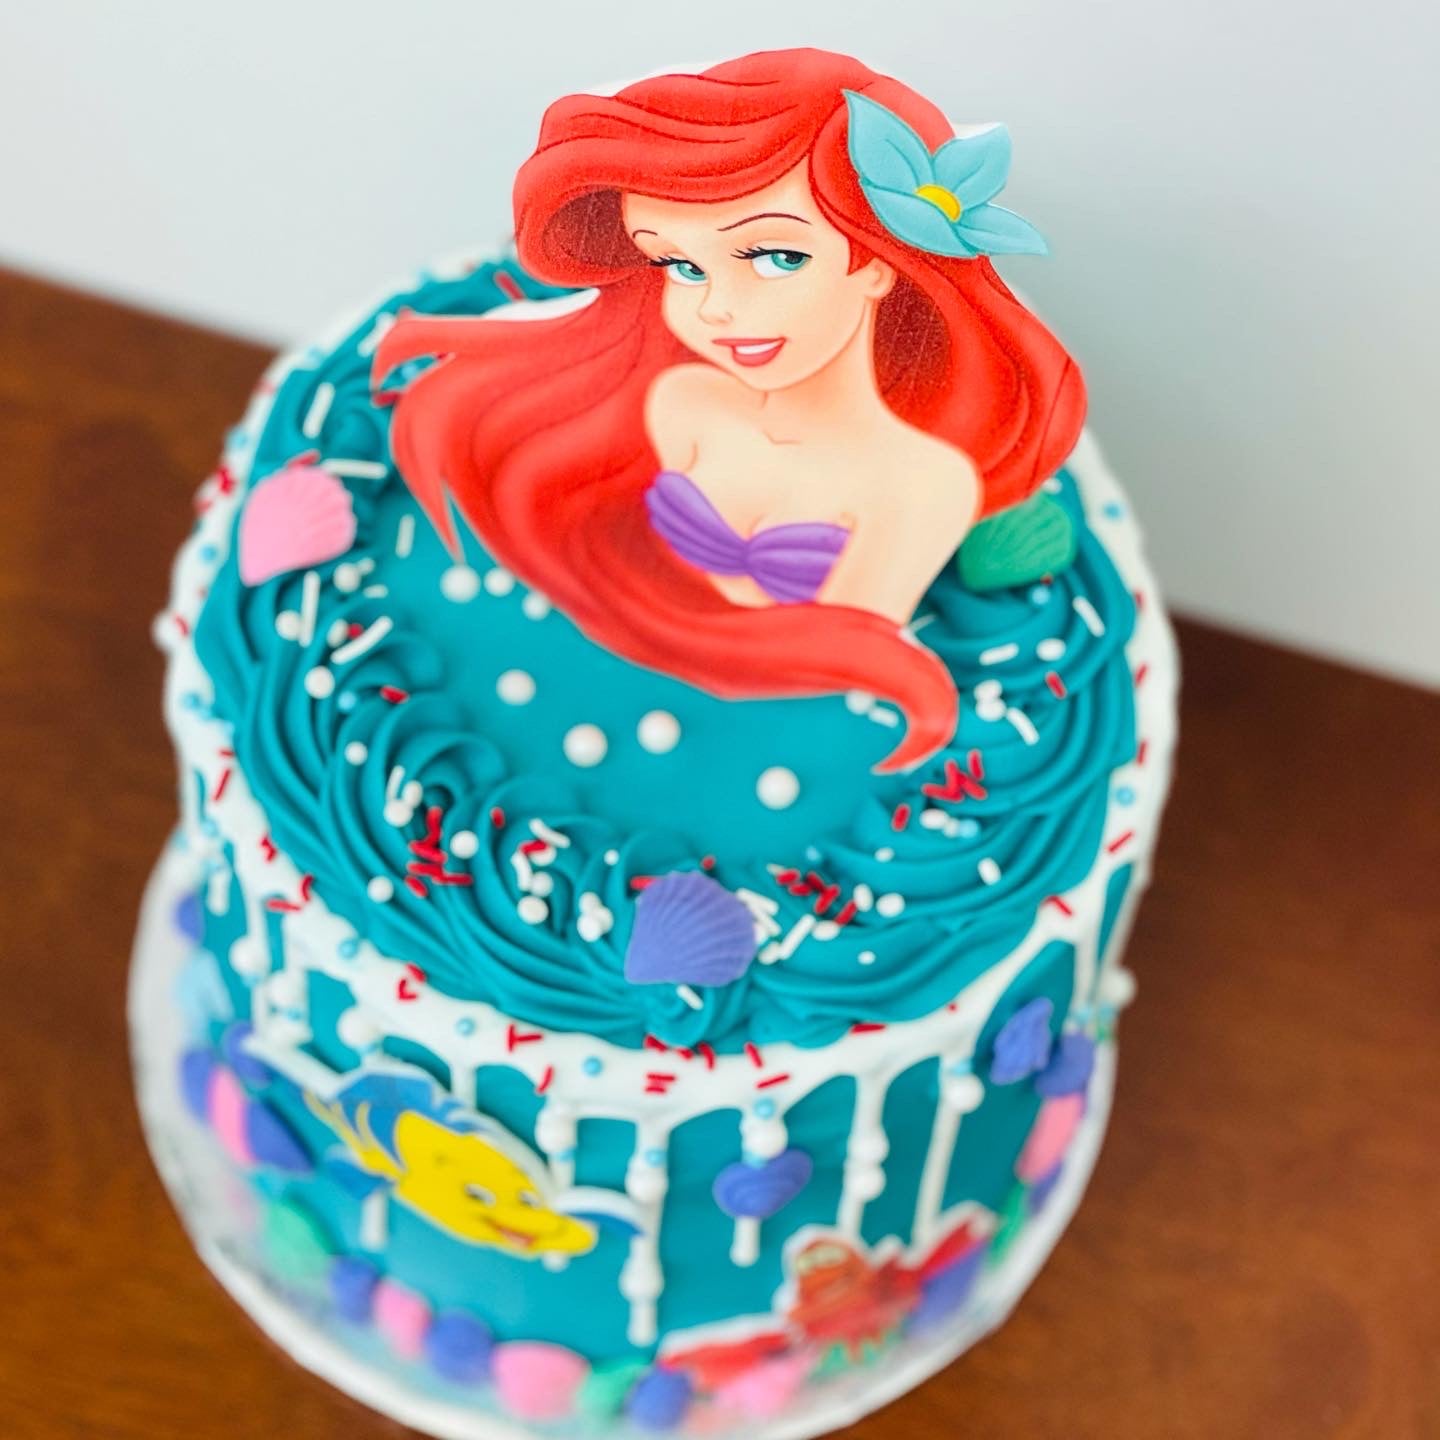 Superb Little Mermaid 3rd Birthday Cake - Between The Pages Blog